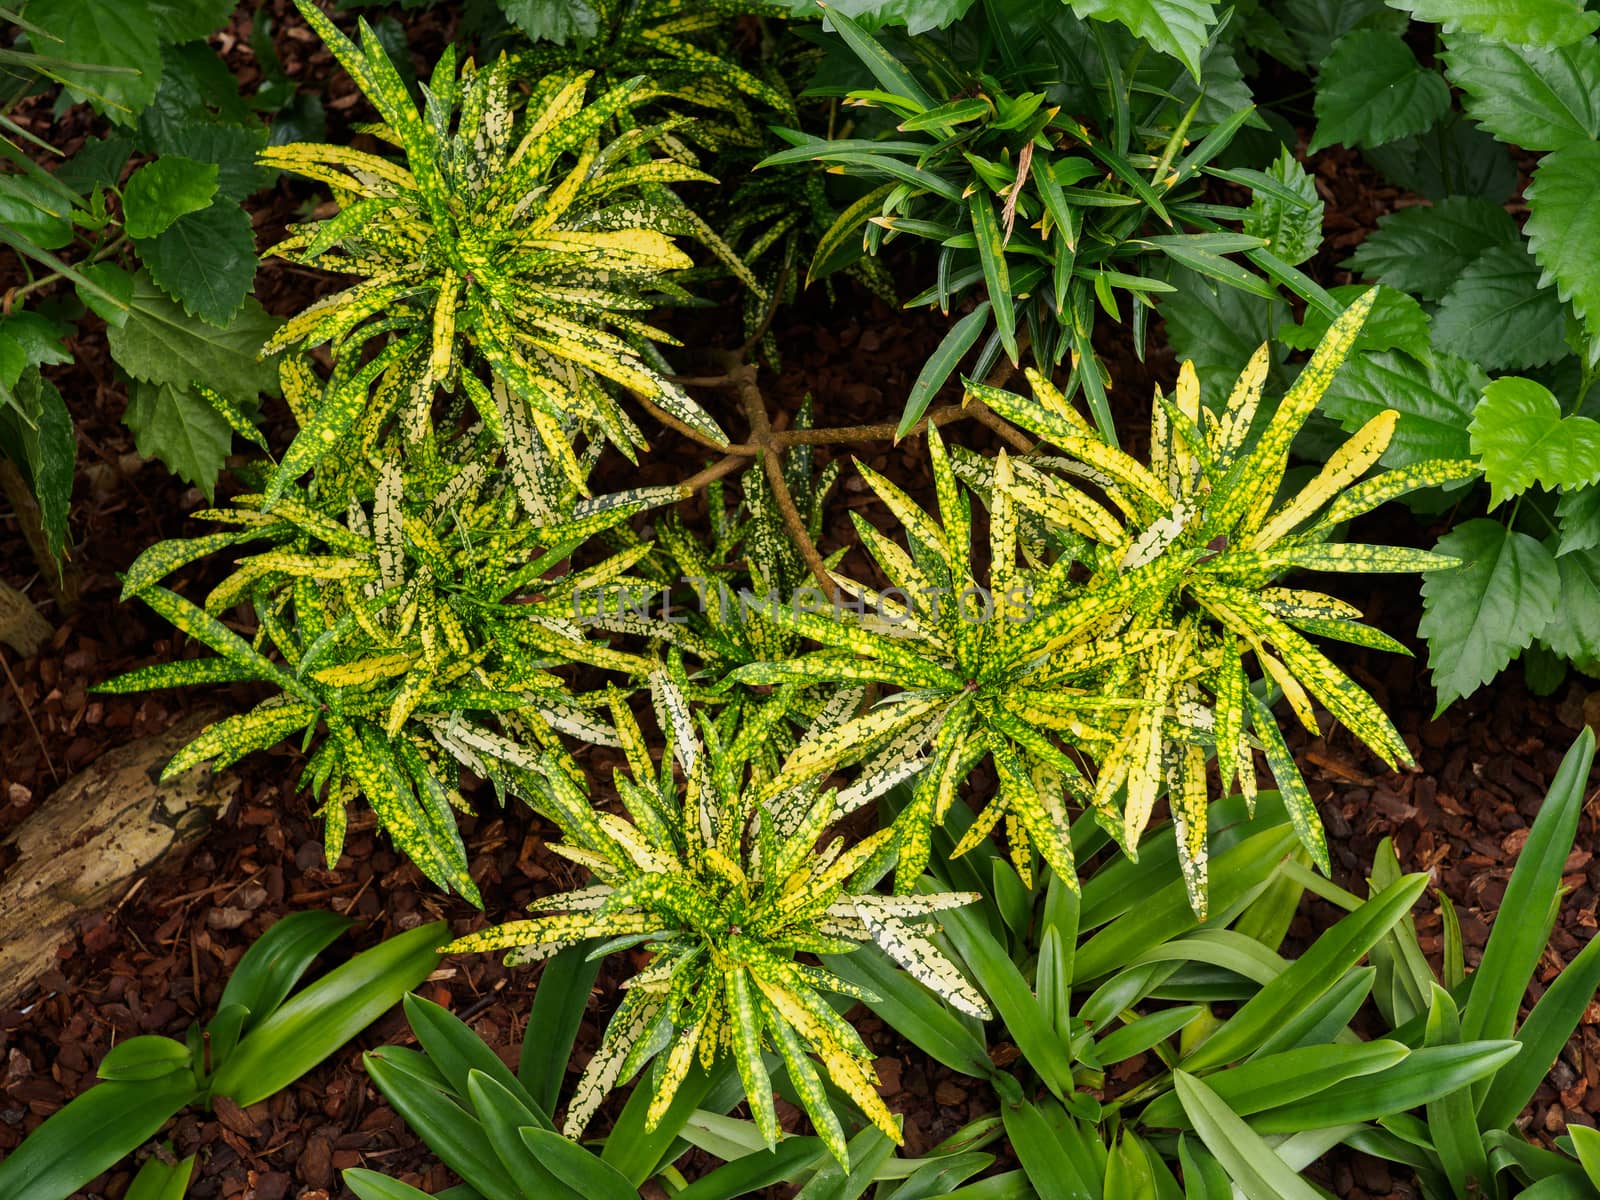 Group of yellow and green tinted tropical plants, Codiaeum variegatum L Blume